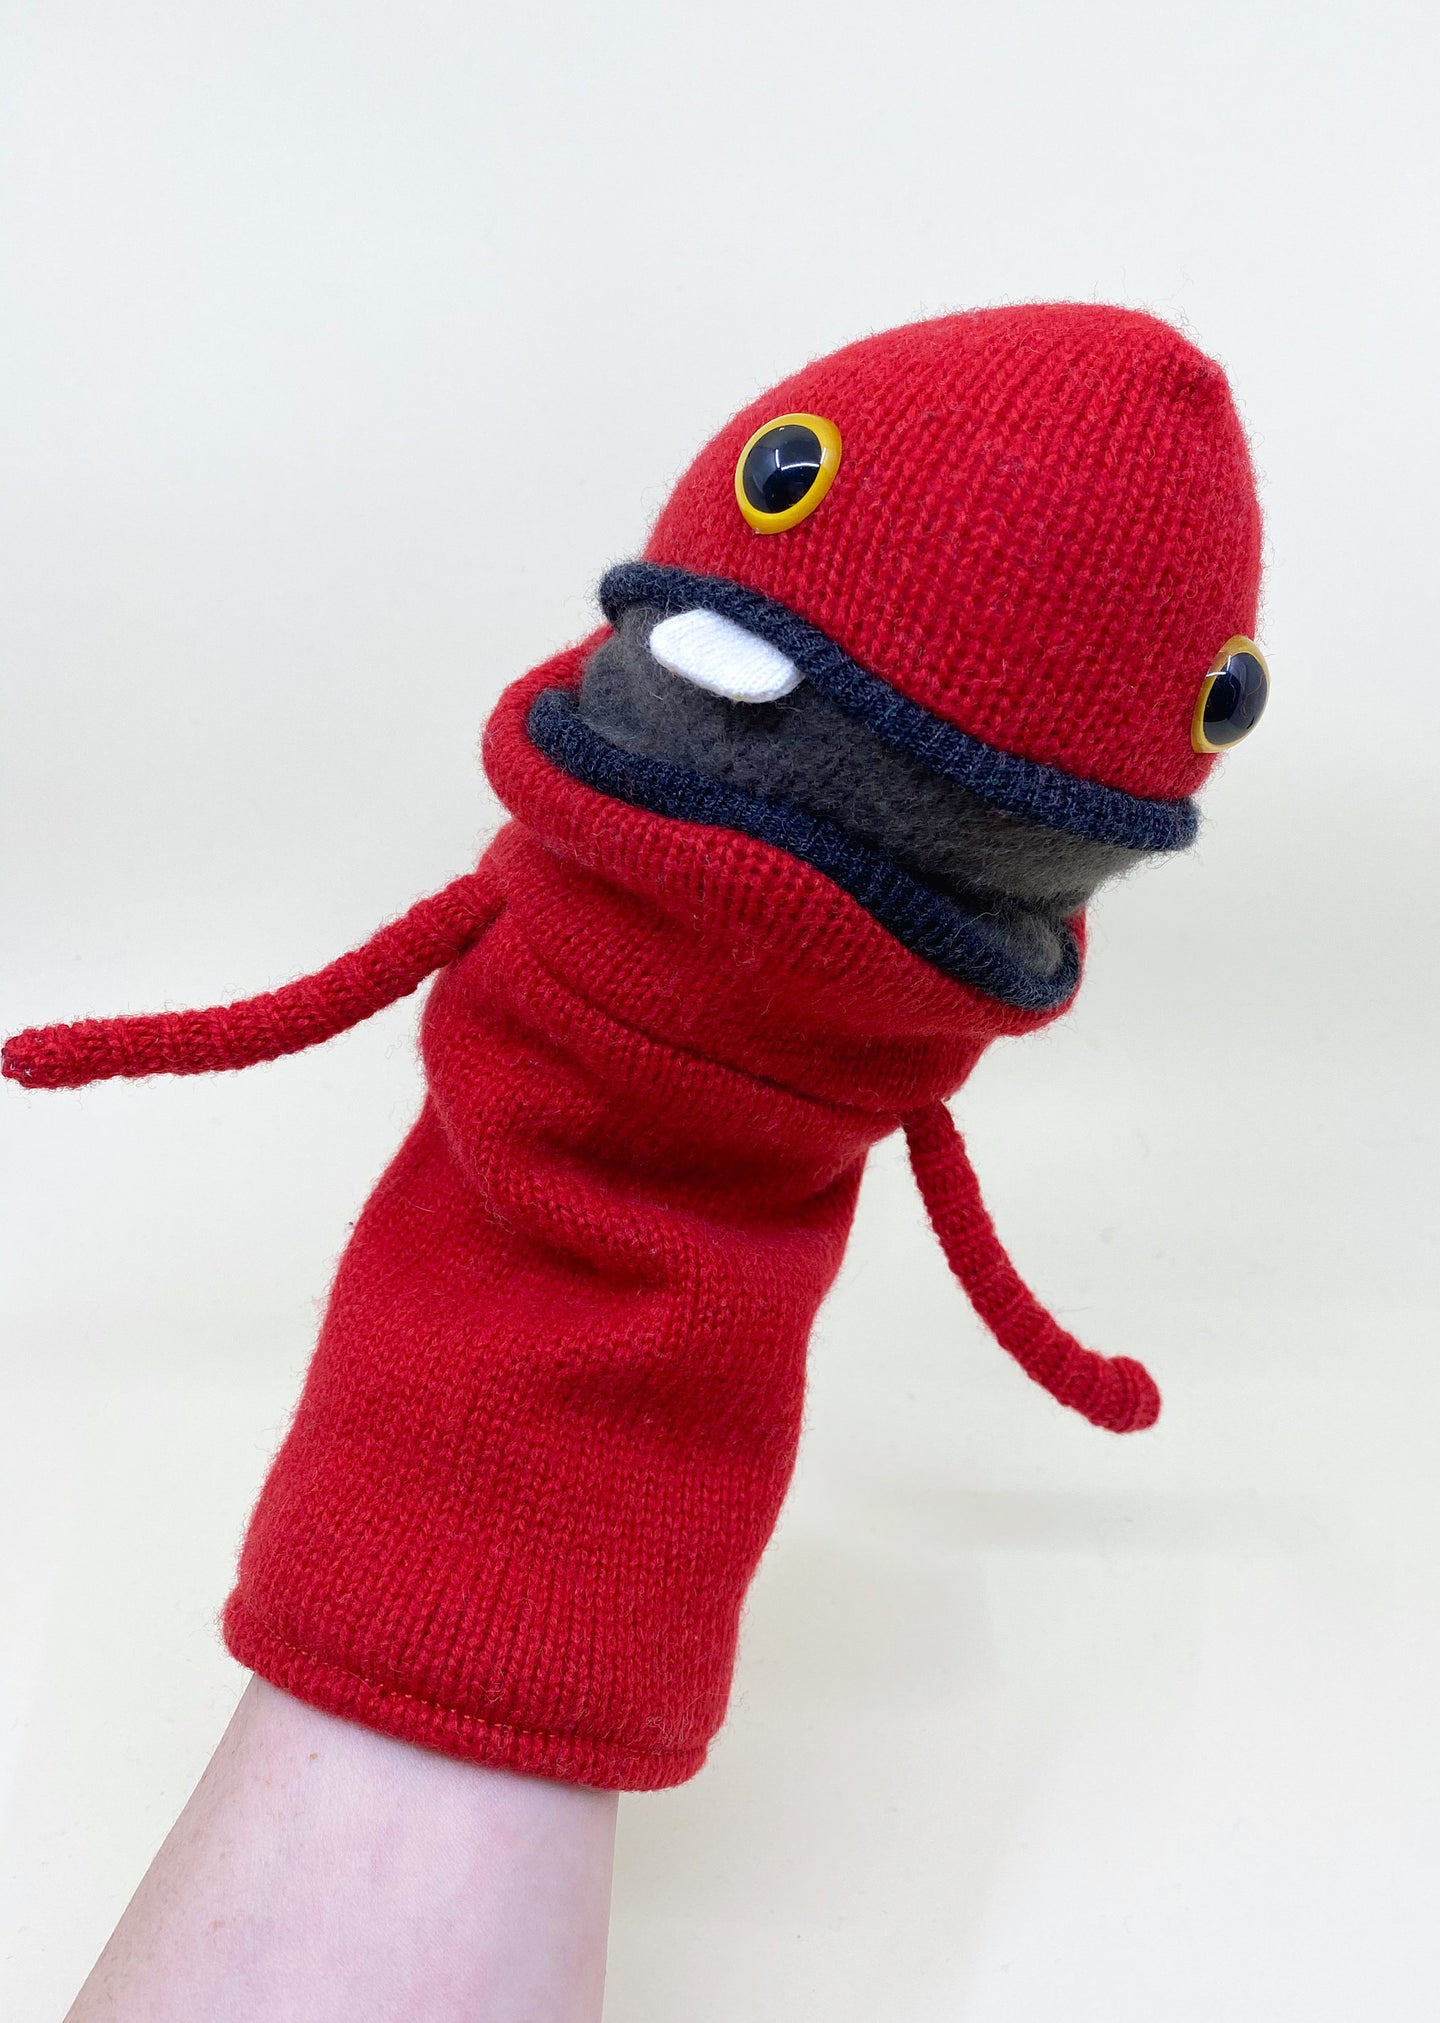 Stanley the recycled sweater puppet monster